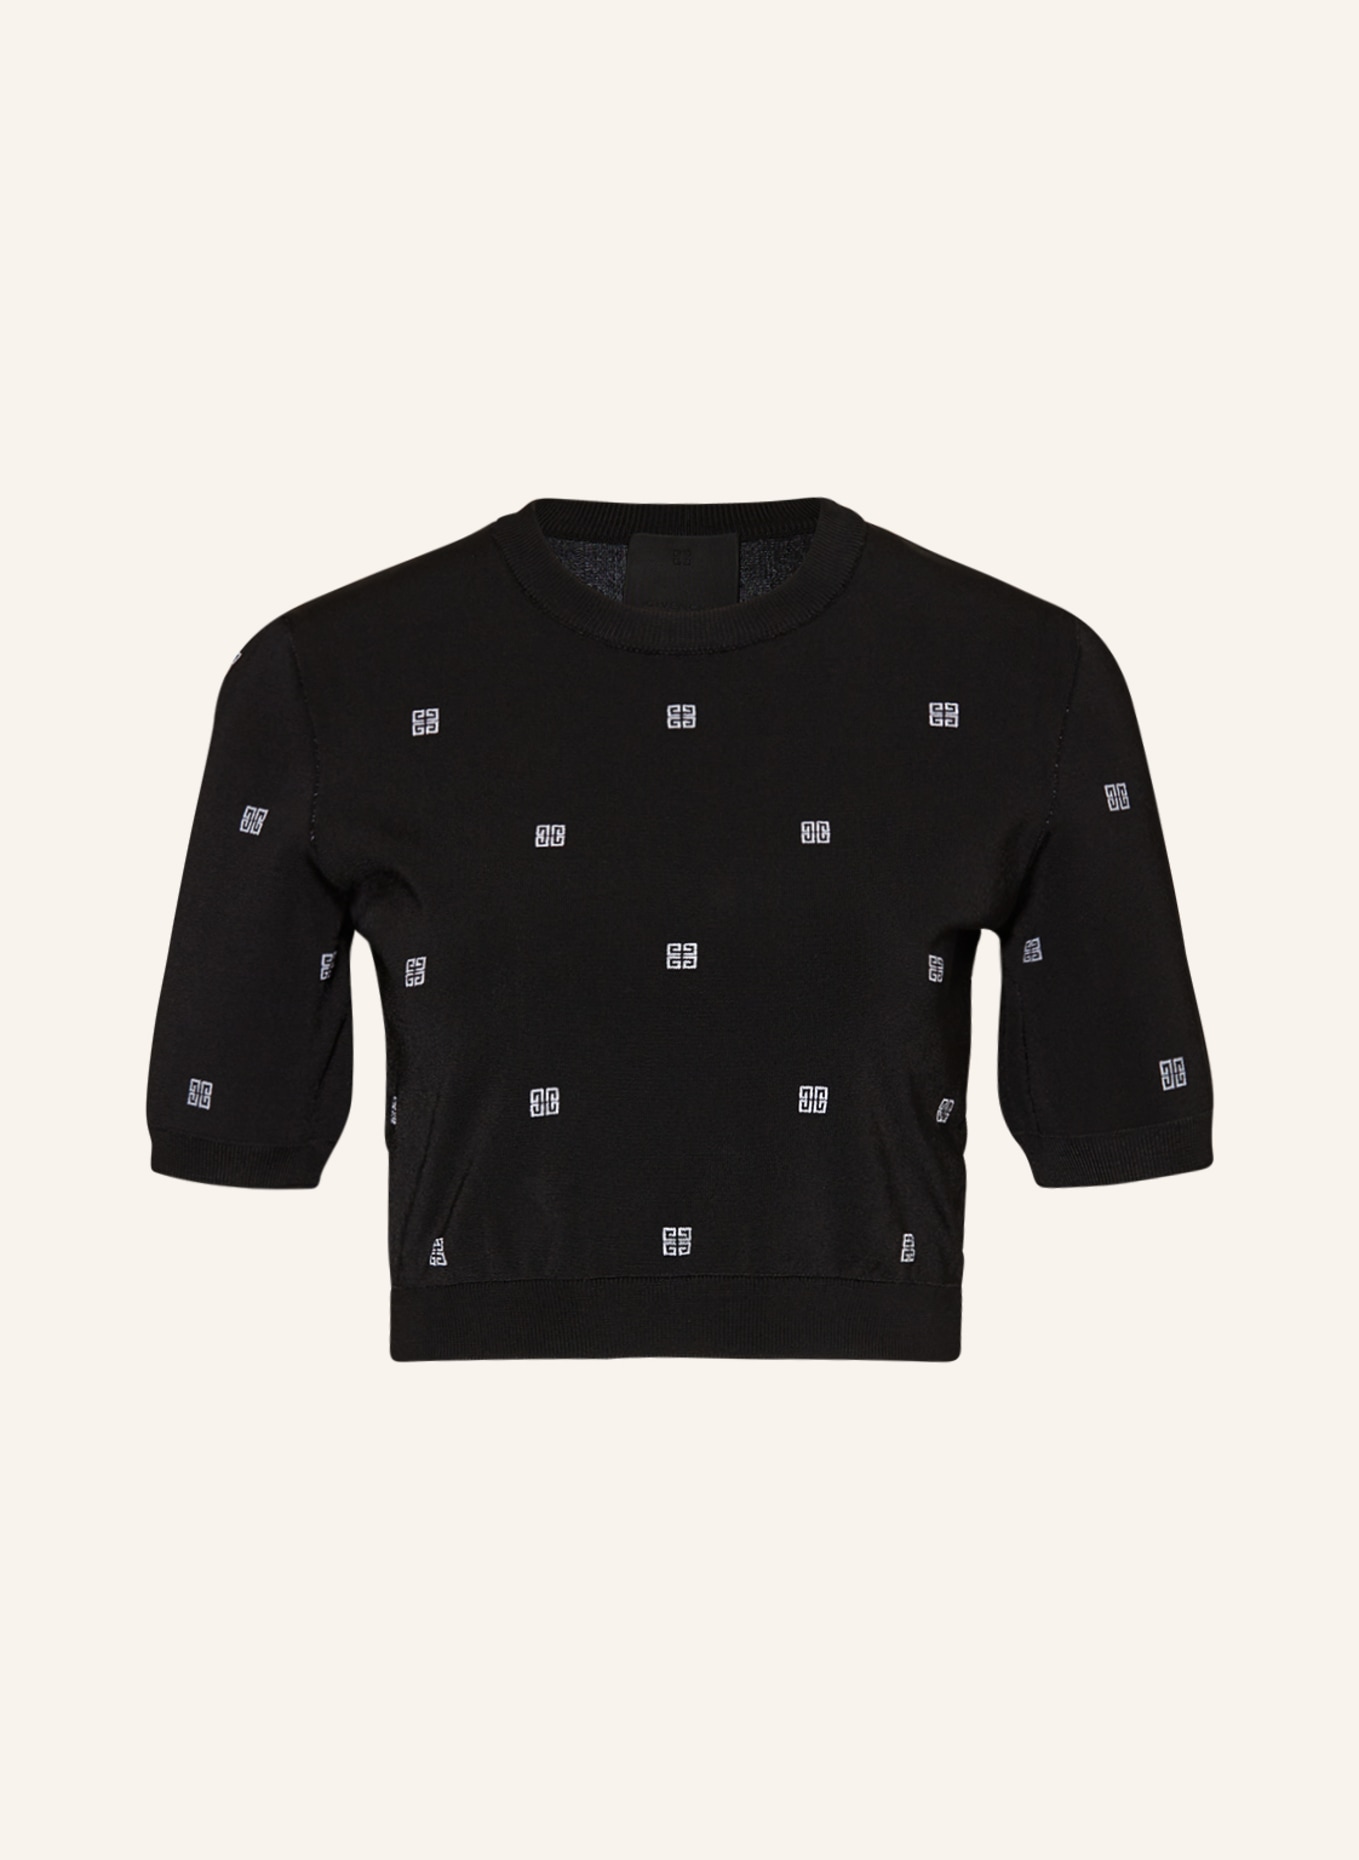 GIVENCHY Cropped-Pullover, Farbe: SCHWARZ/ WEISS (Bild 1)